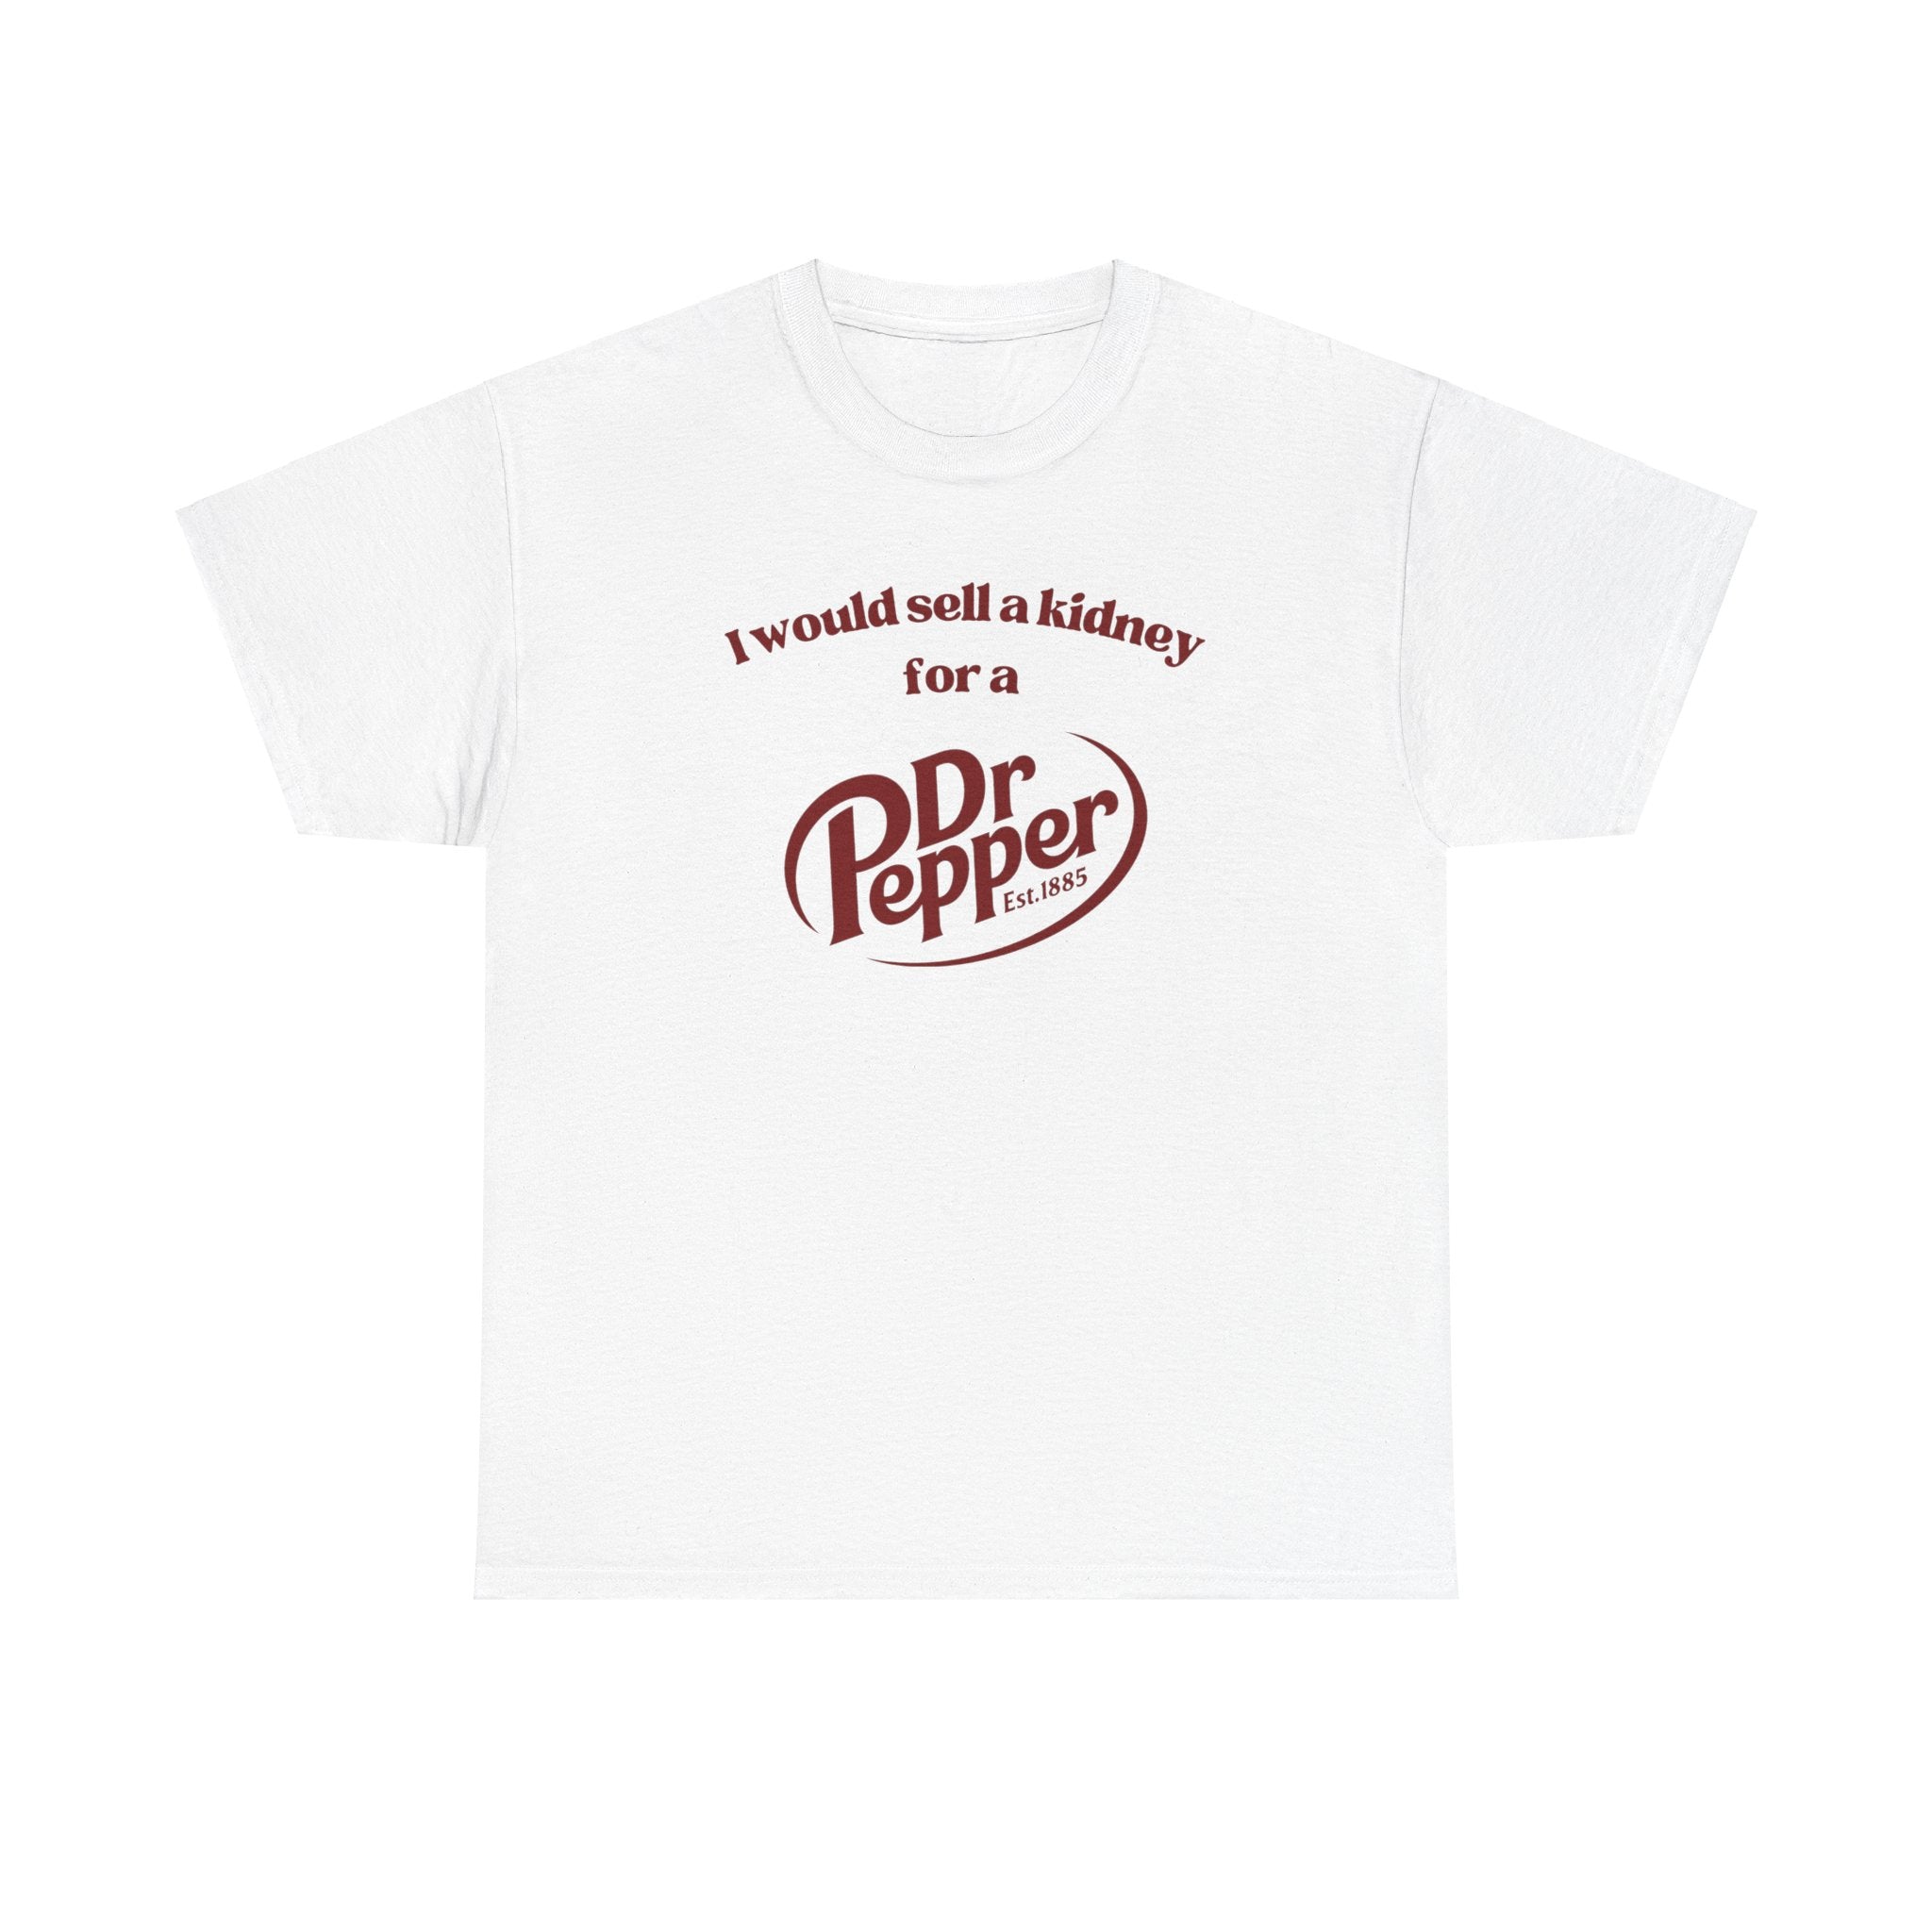 I would sell a kidney for a Dr. Pepper